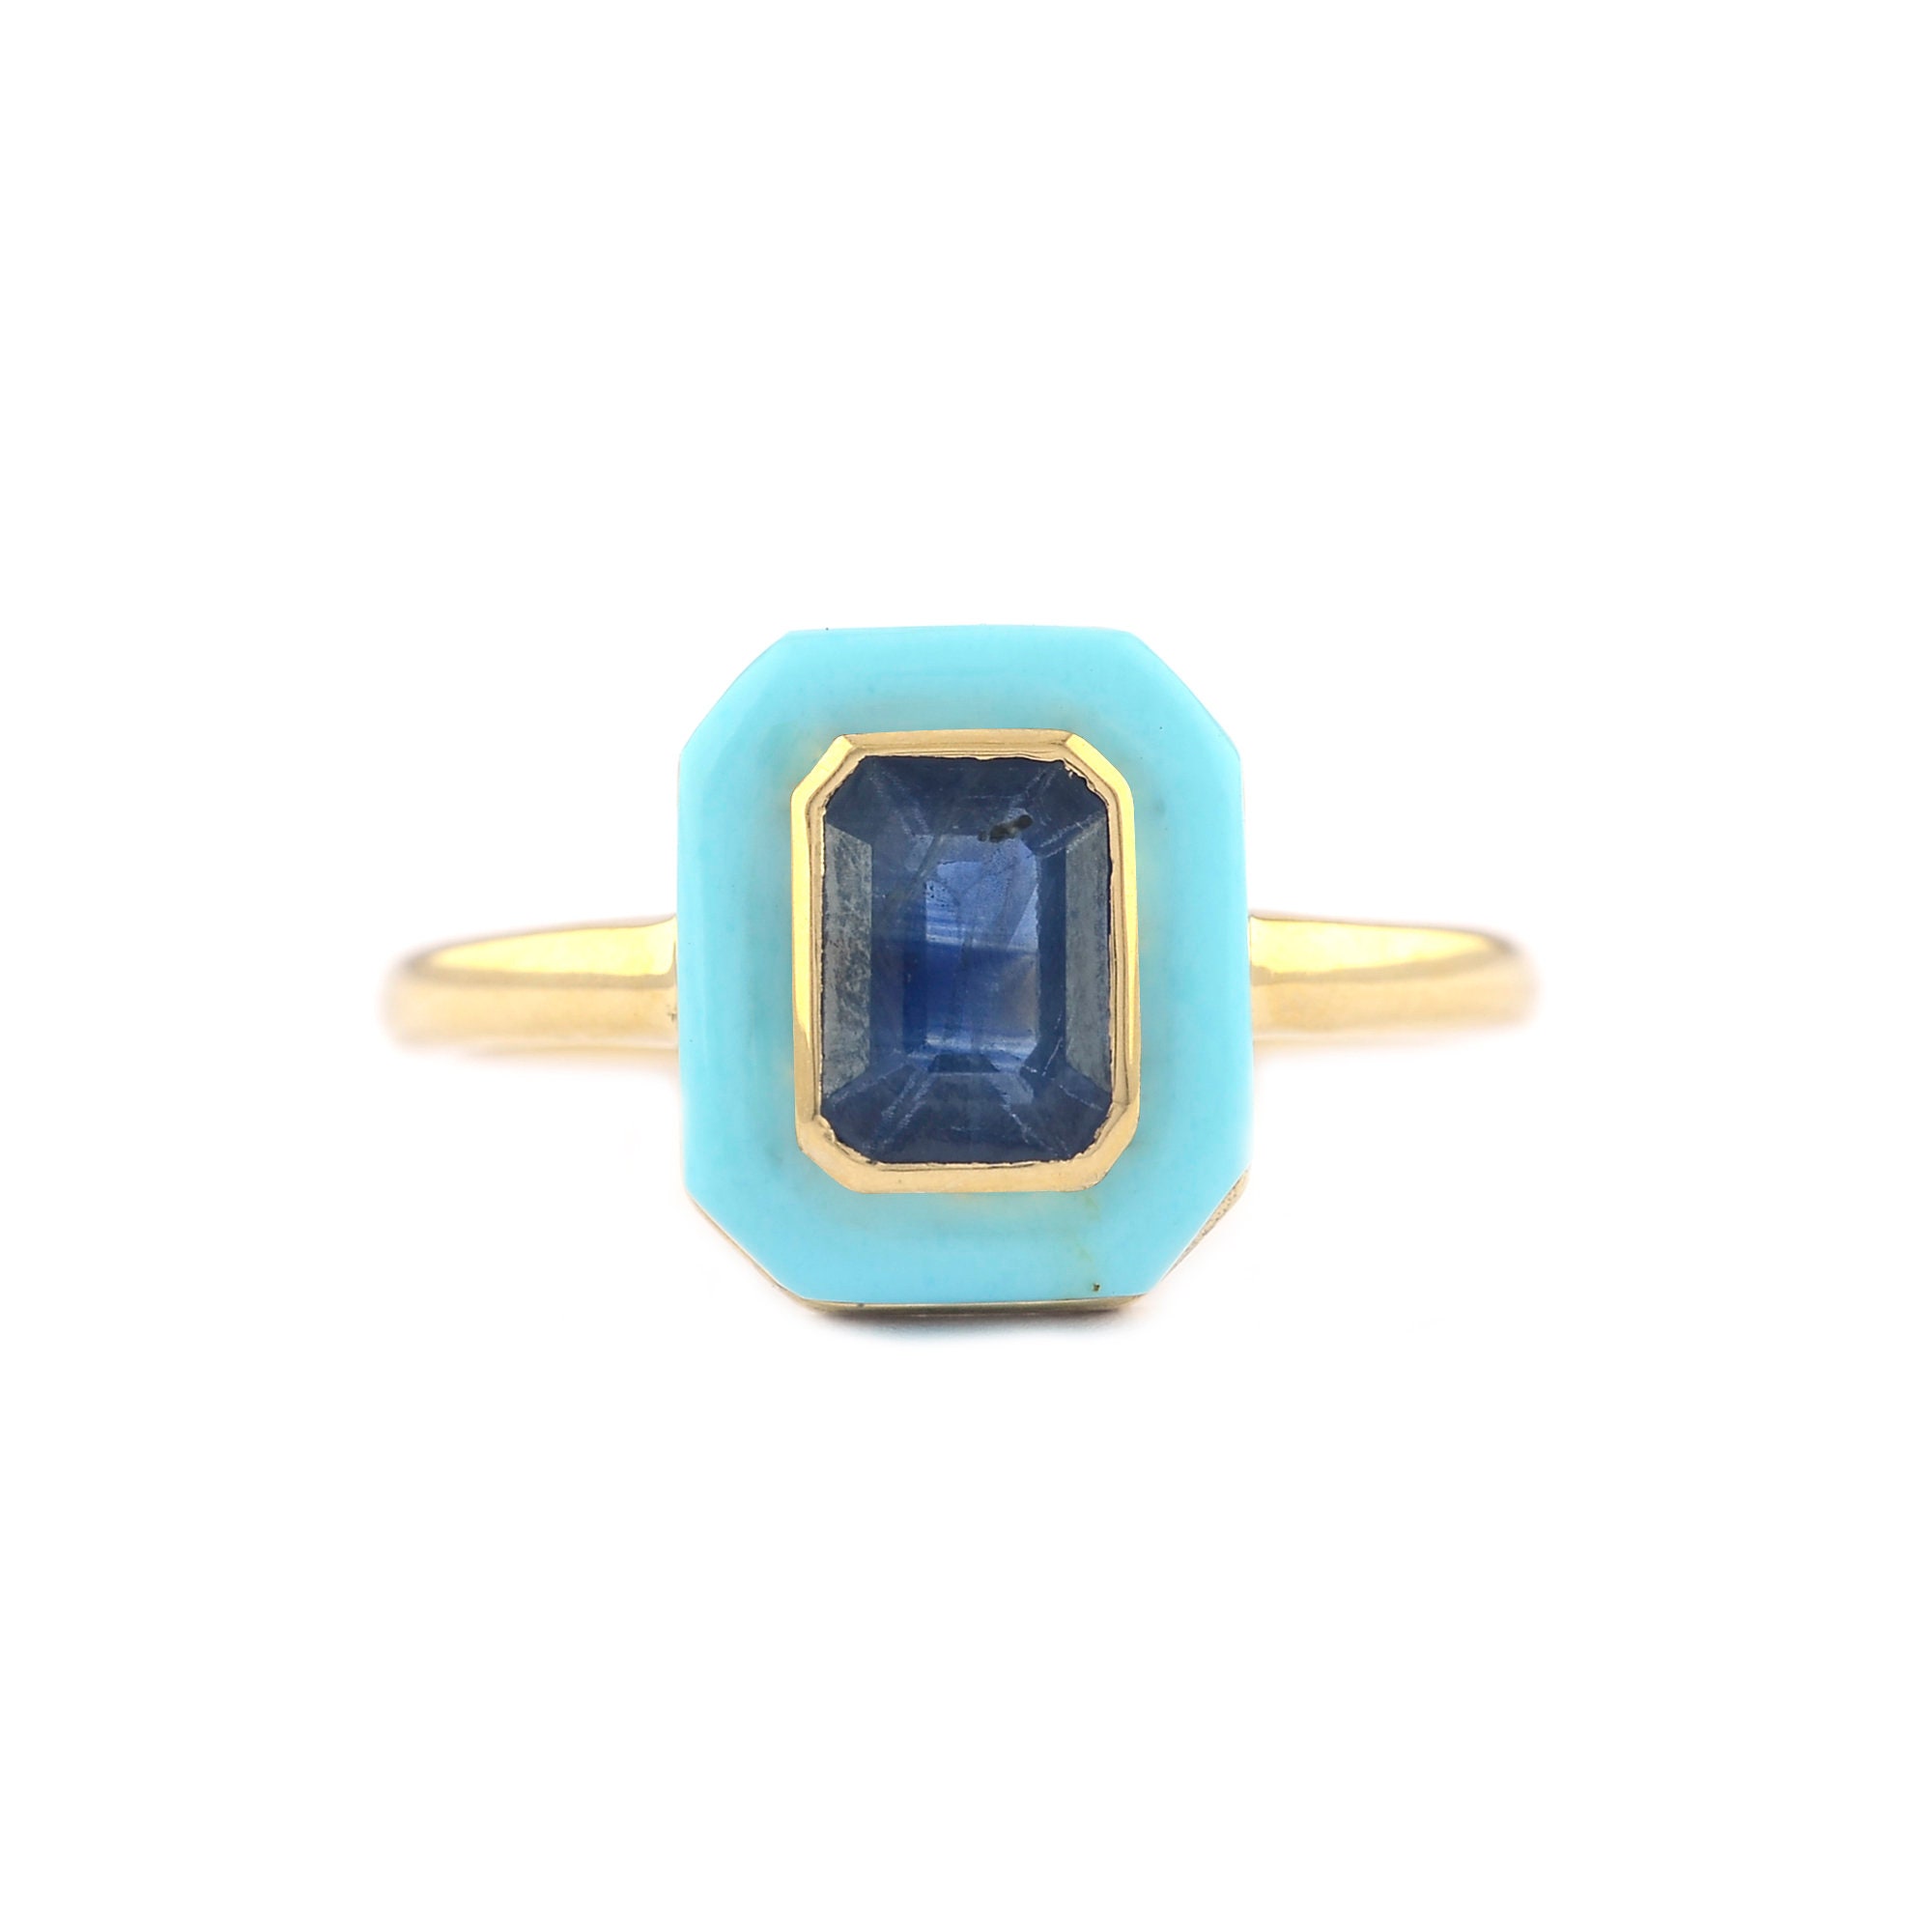 Ring Band Ring 585/14K Yellow Gold Turquoise Sapphire Ring Size 55 | eBay